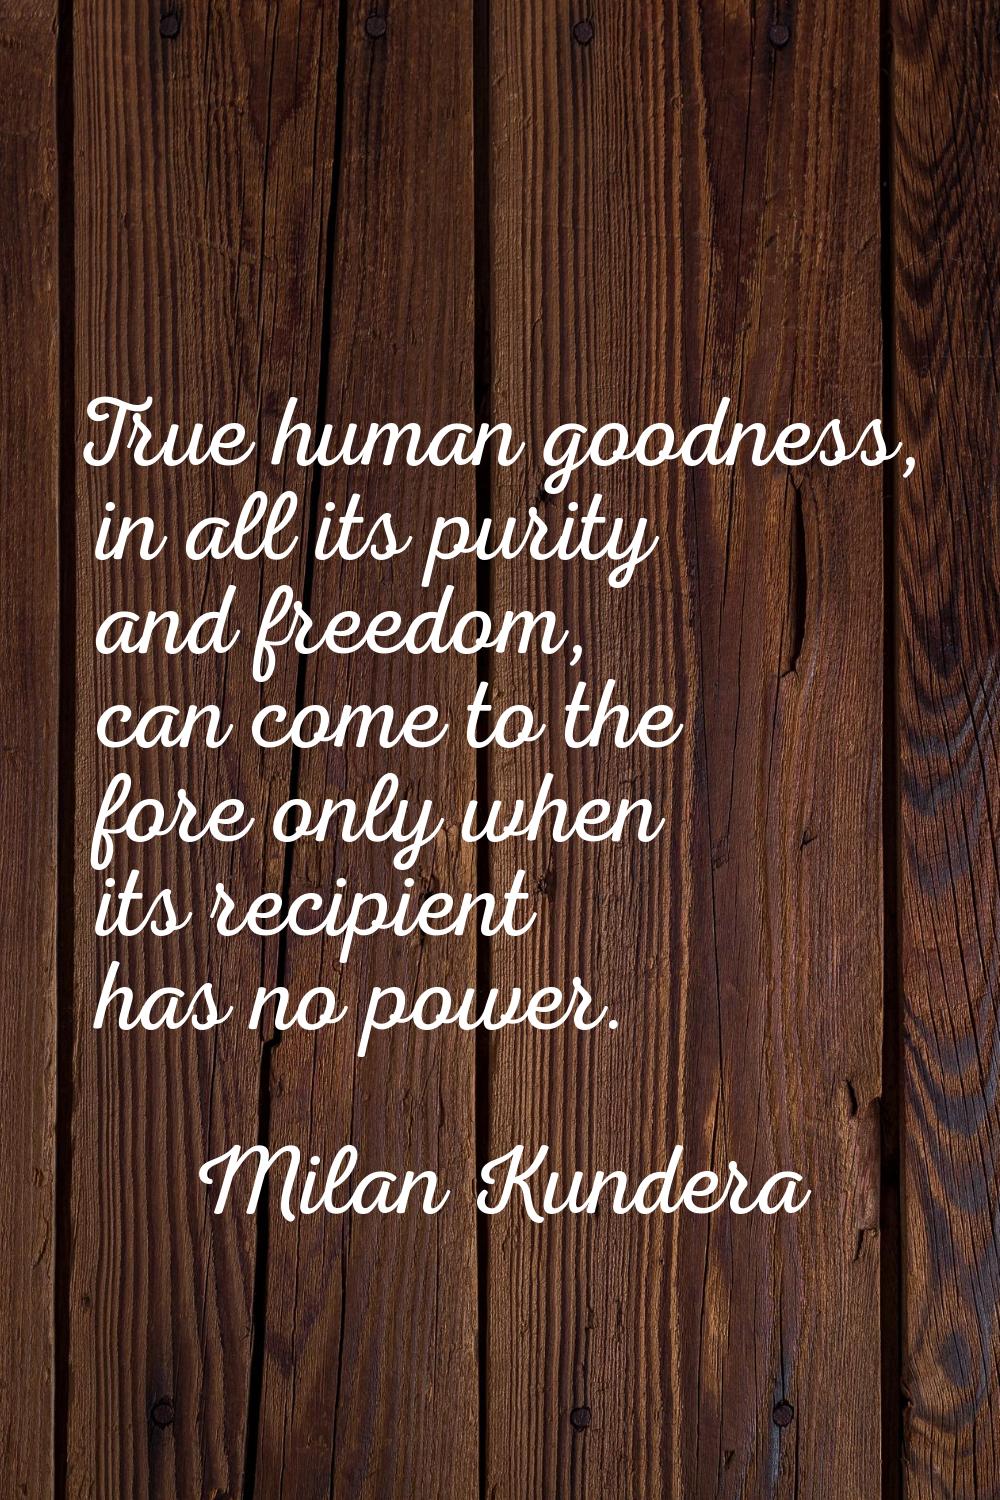 True human goodness, in all its purity and freedom, can come to the fore only when its recipient ha